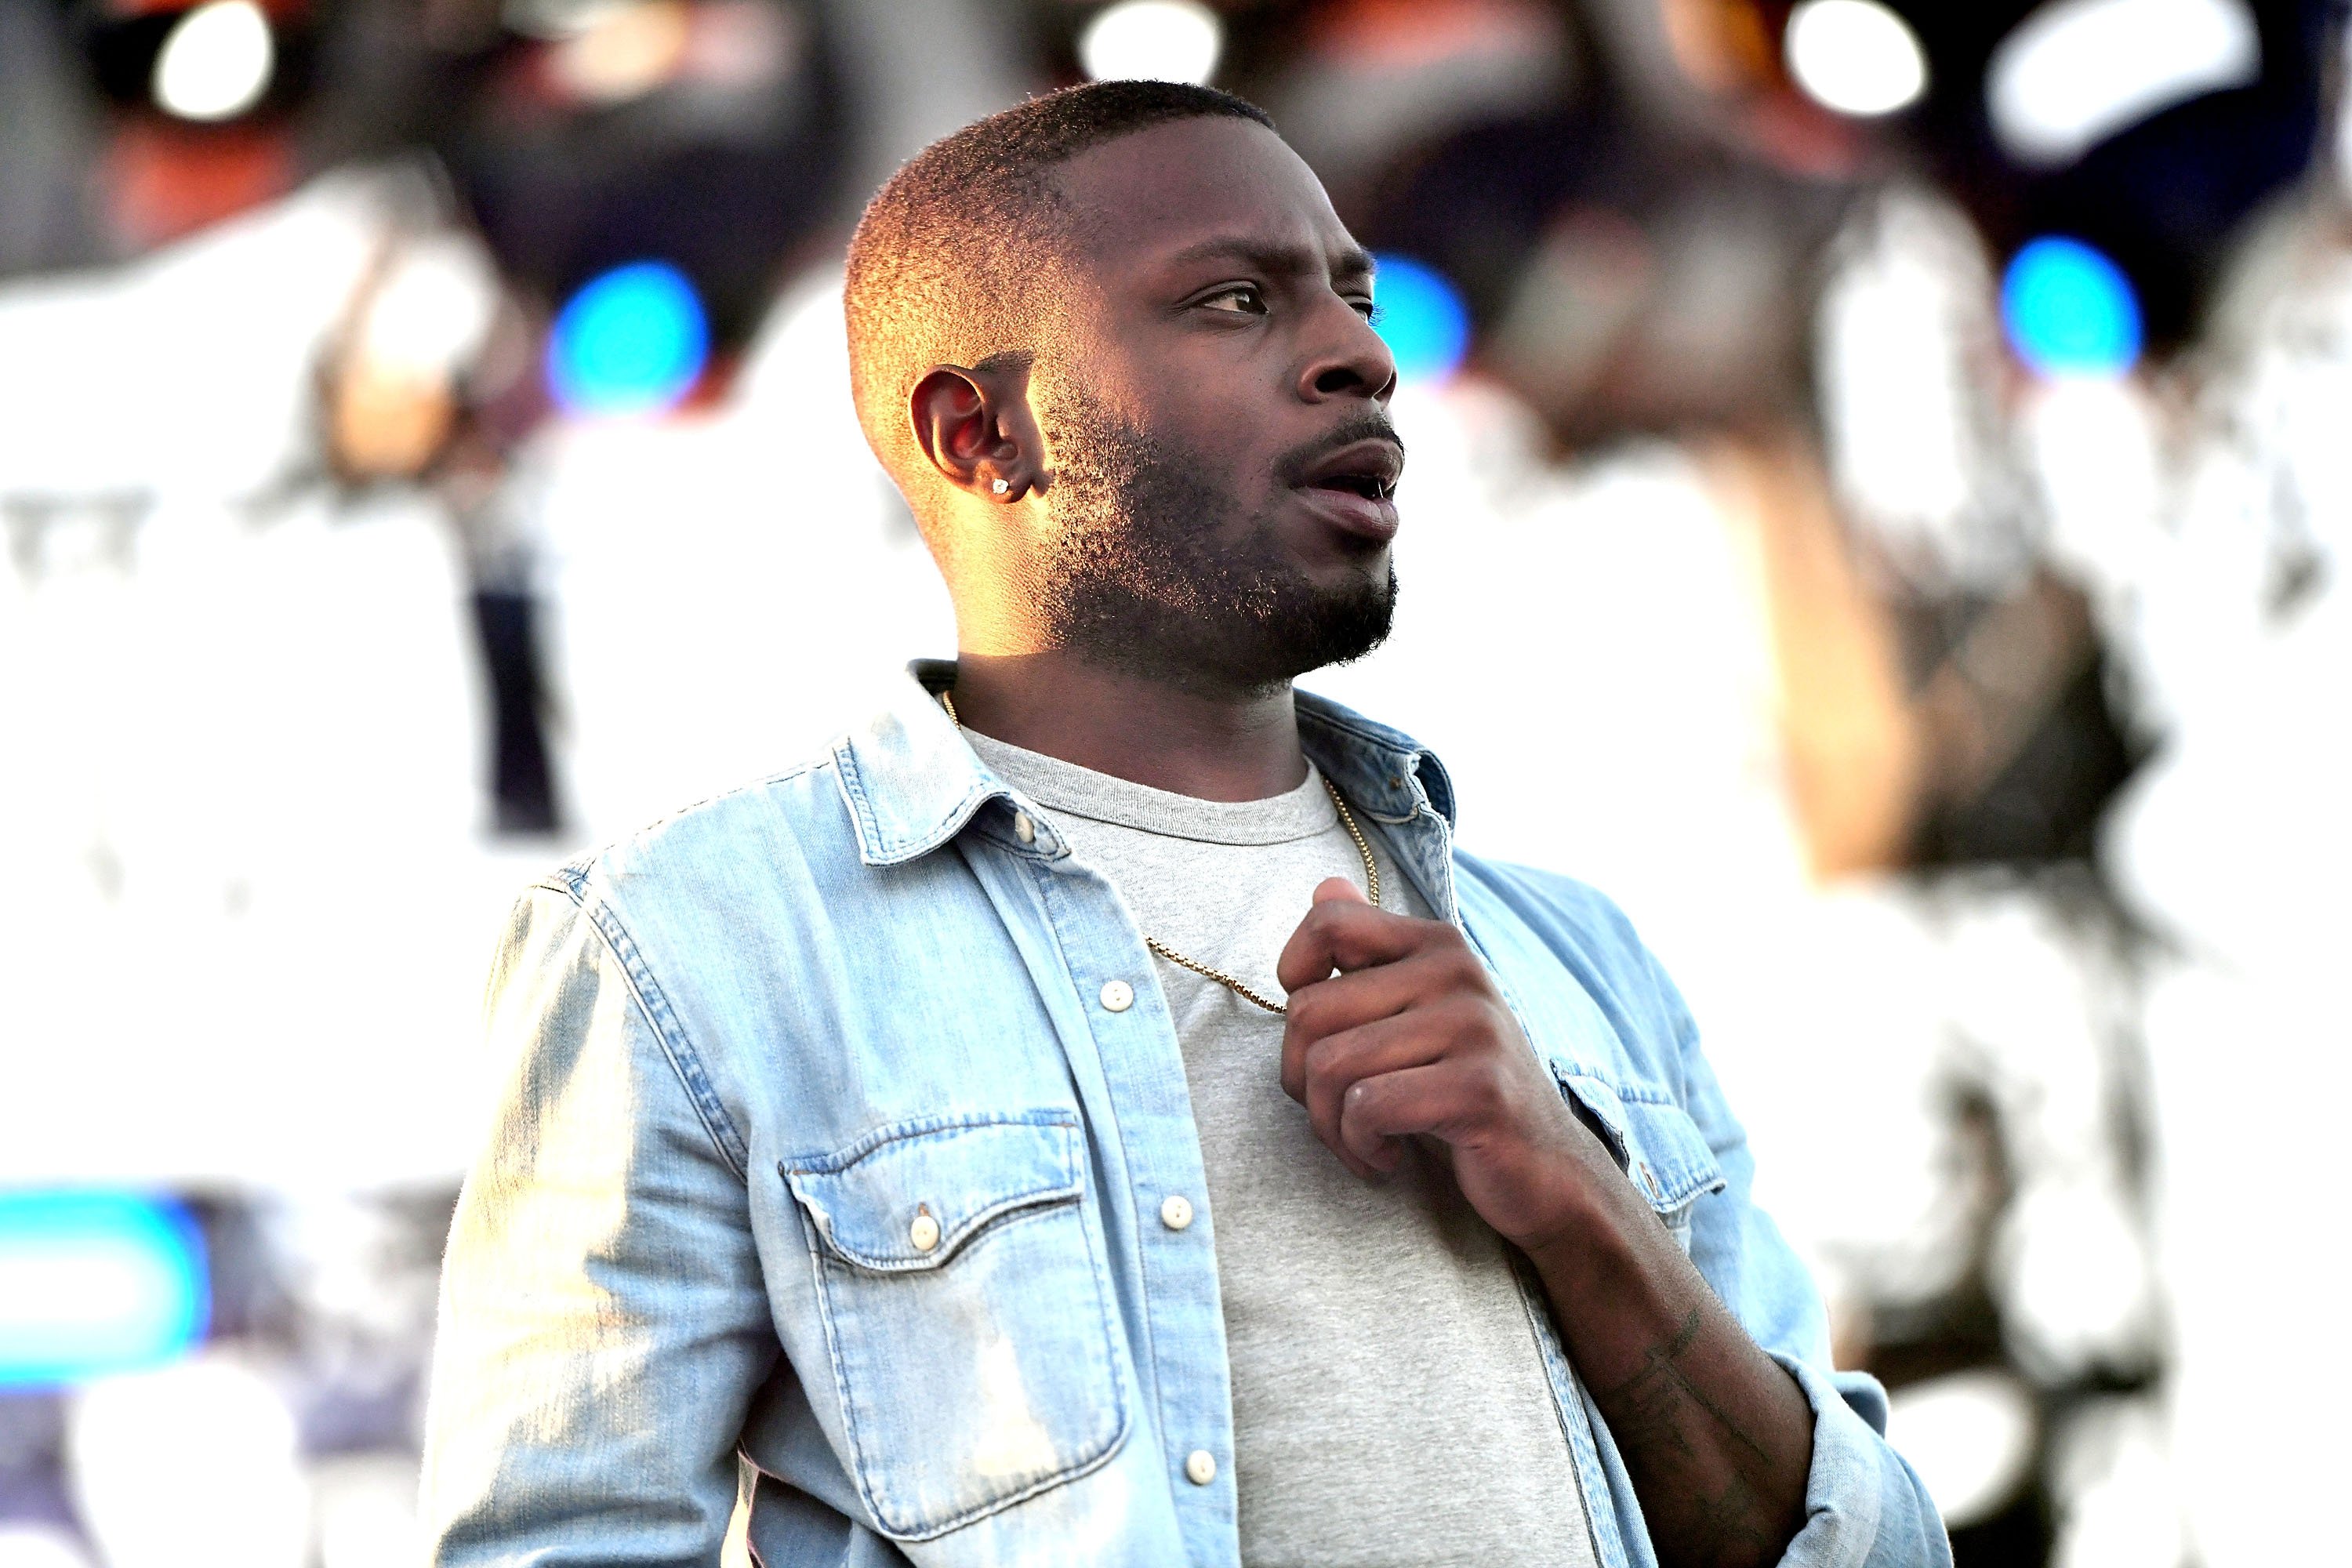 Isaiah Rashad performs onstage during the Smokers Club Festival at The Queen Mary on April 29, 2018, in Long Beach, California. | Source: Getty Images